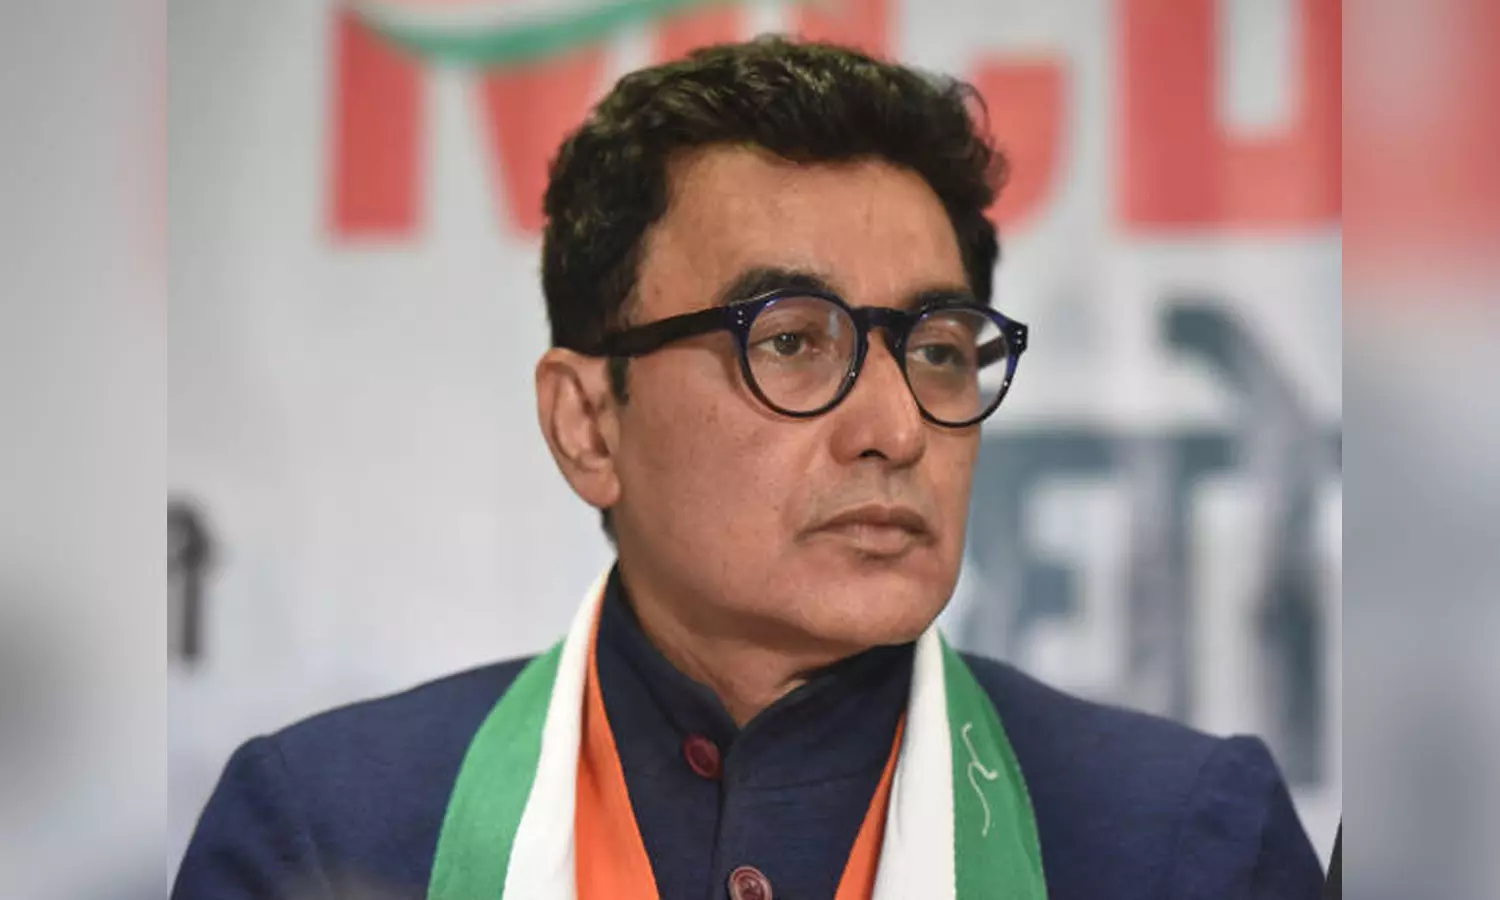 With less than 25 employees, NTA conducts over two dozen exams: Congress leader Ajoy Kumar